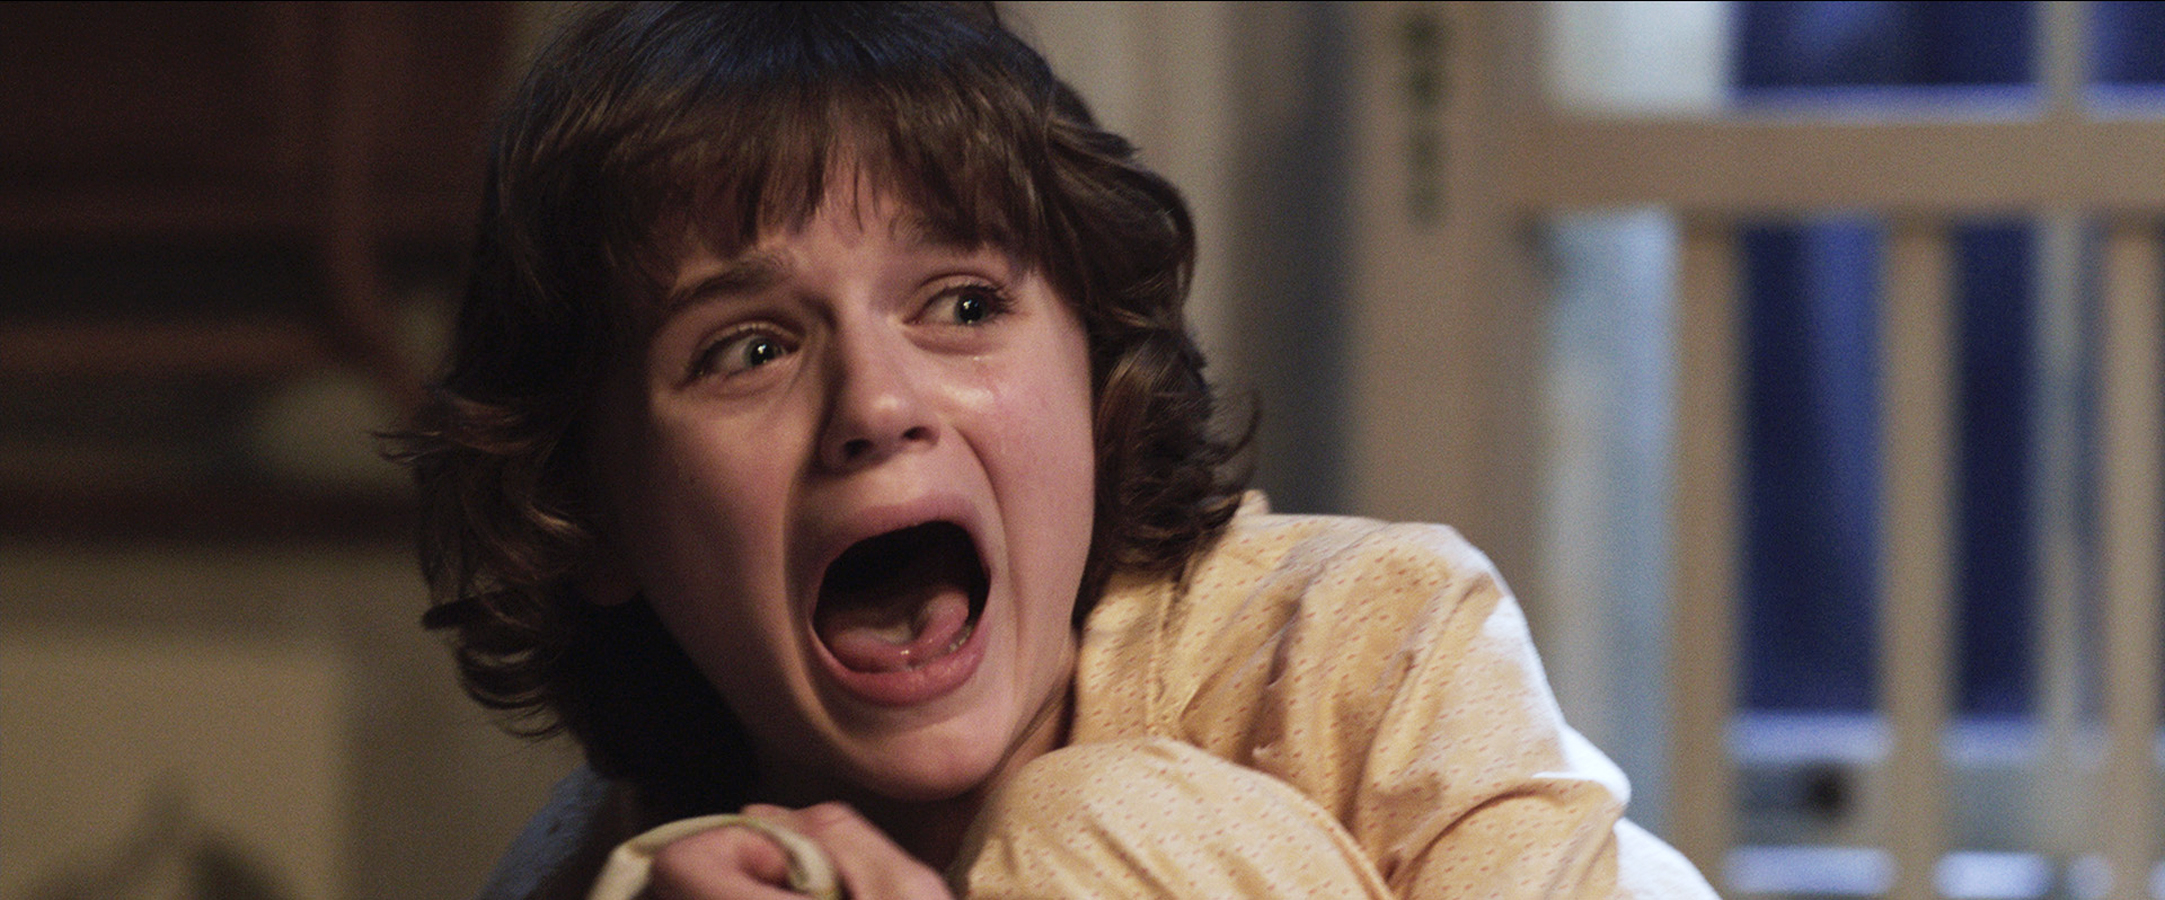 Joey King in &quot;The Conjuring&quot;